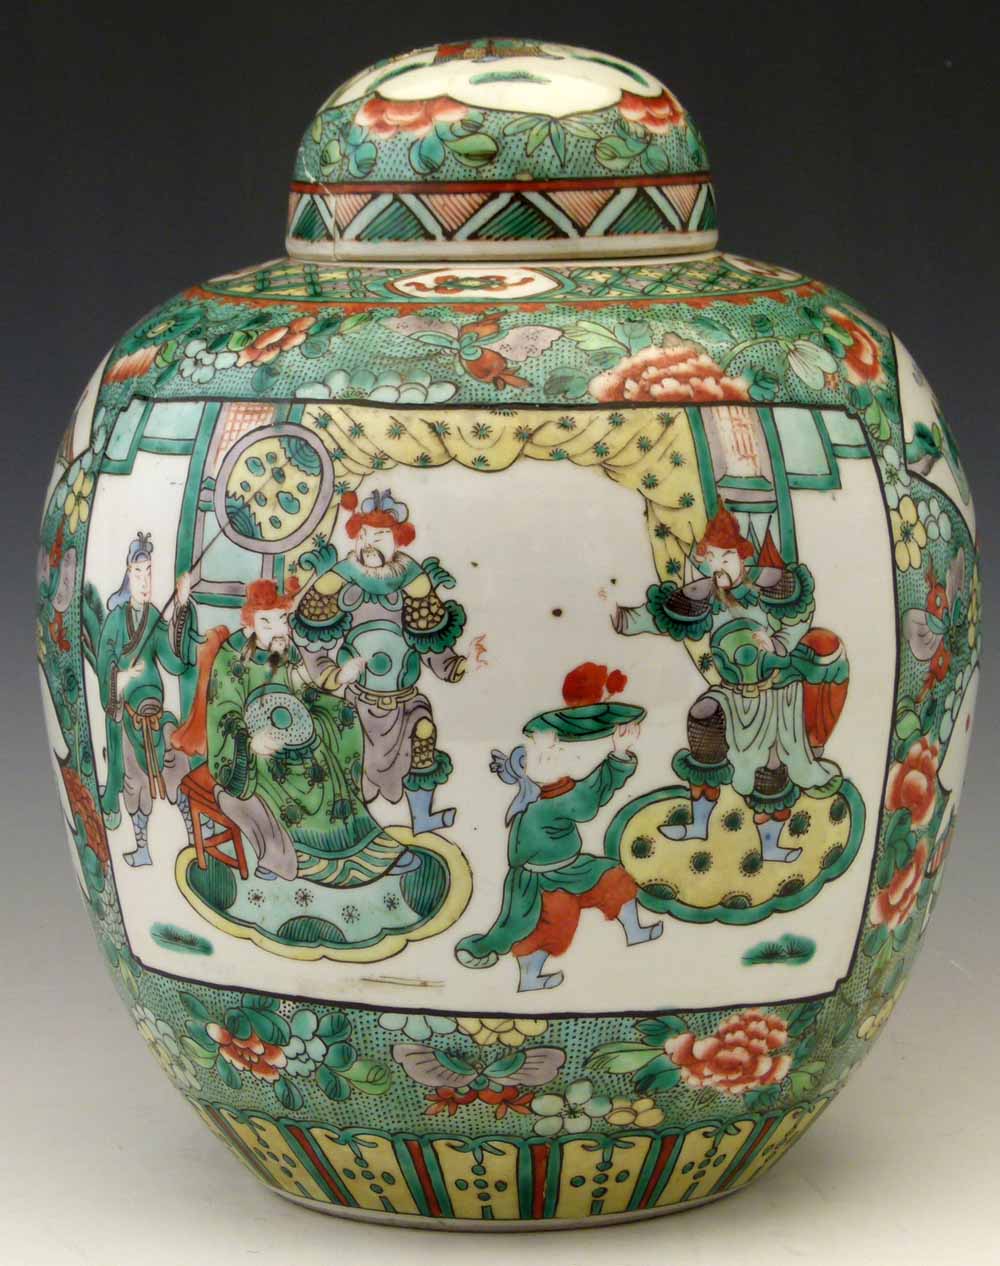 Chinese famille verte lidded jar, 19th century, painted on the floral ground with panels of